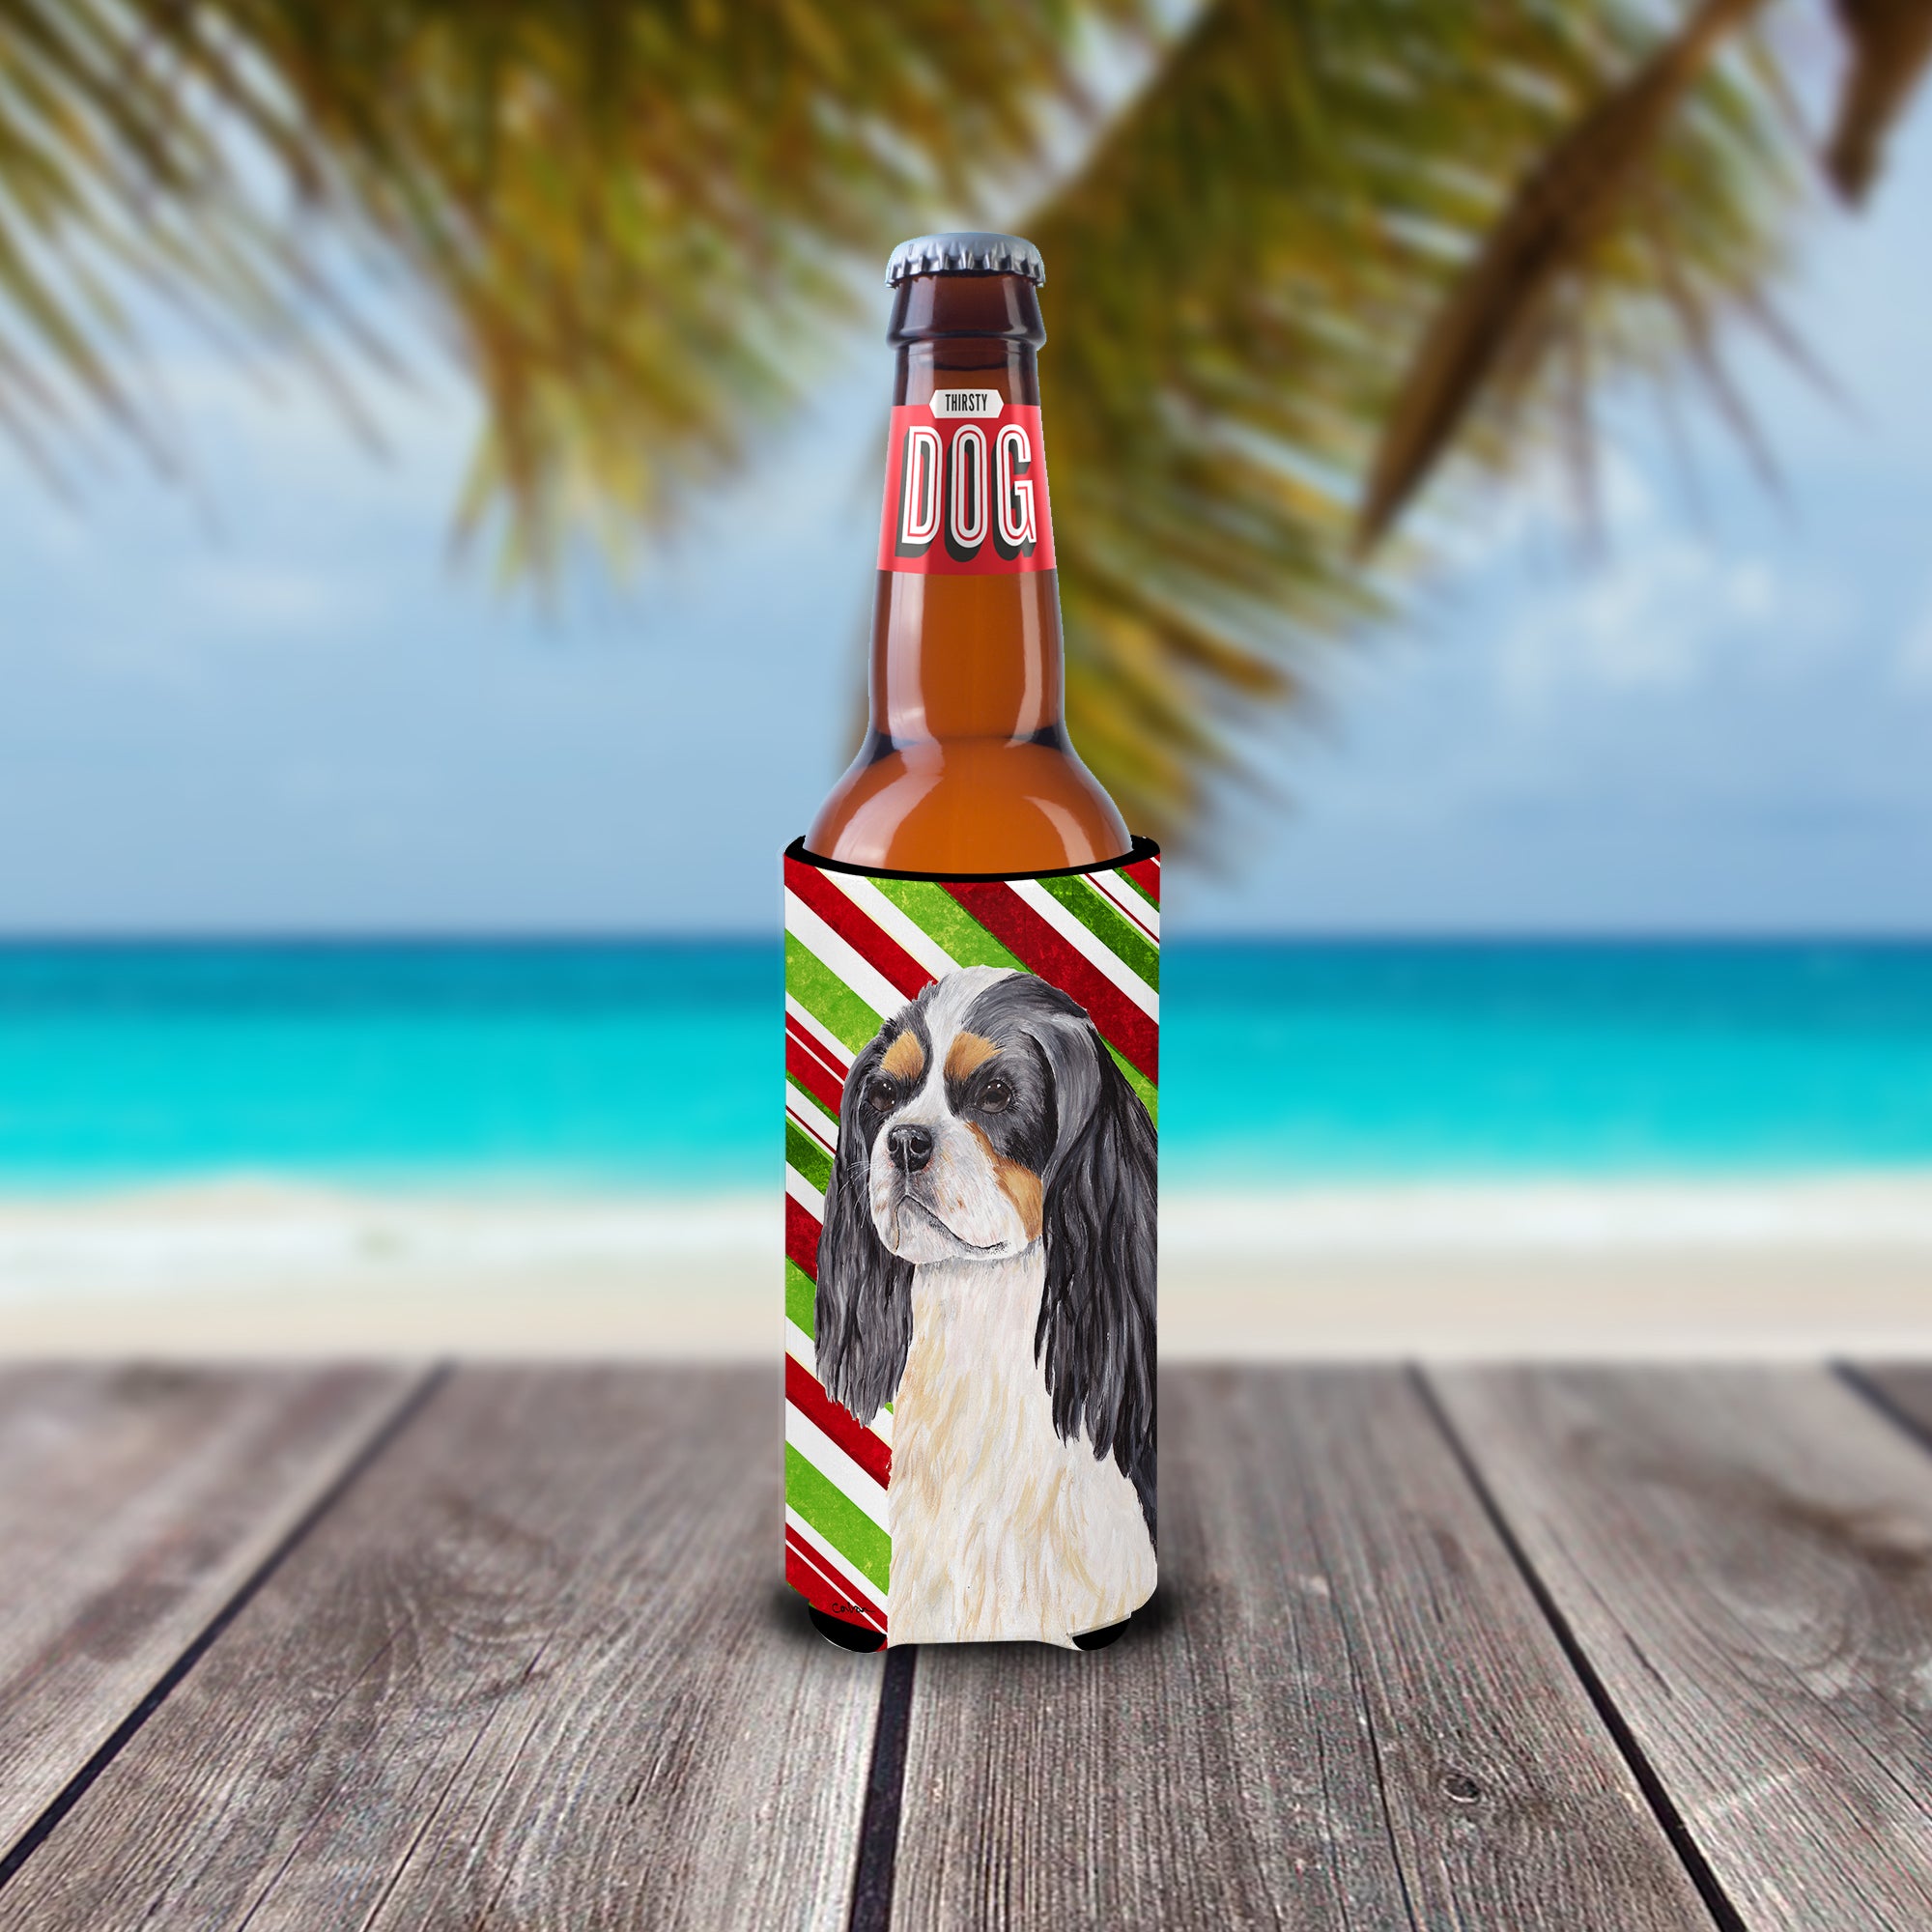 Cavalier Spaniel Candy Cane Holiday Christmas Ultra Beverage Insulators for slim cans SC9351MUK